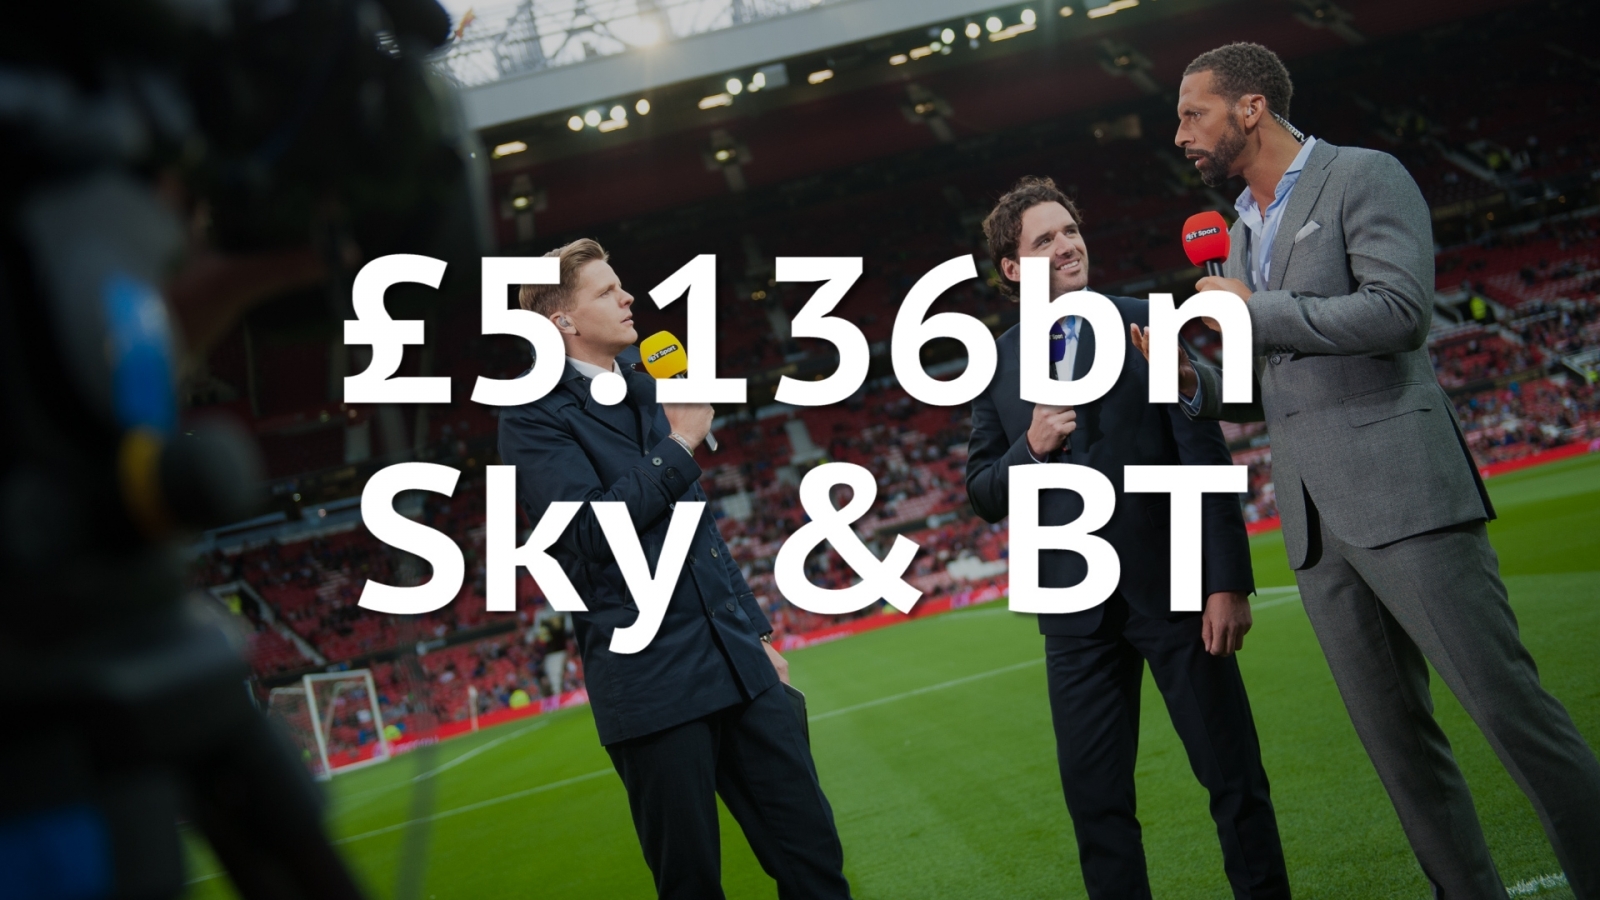 Cost of Premier league TV rights 2017